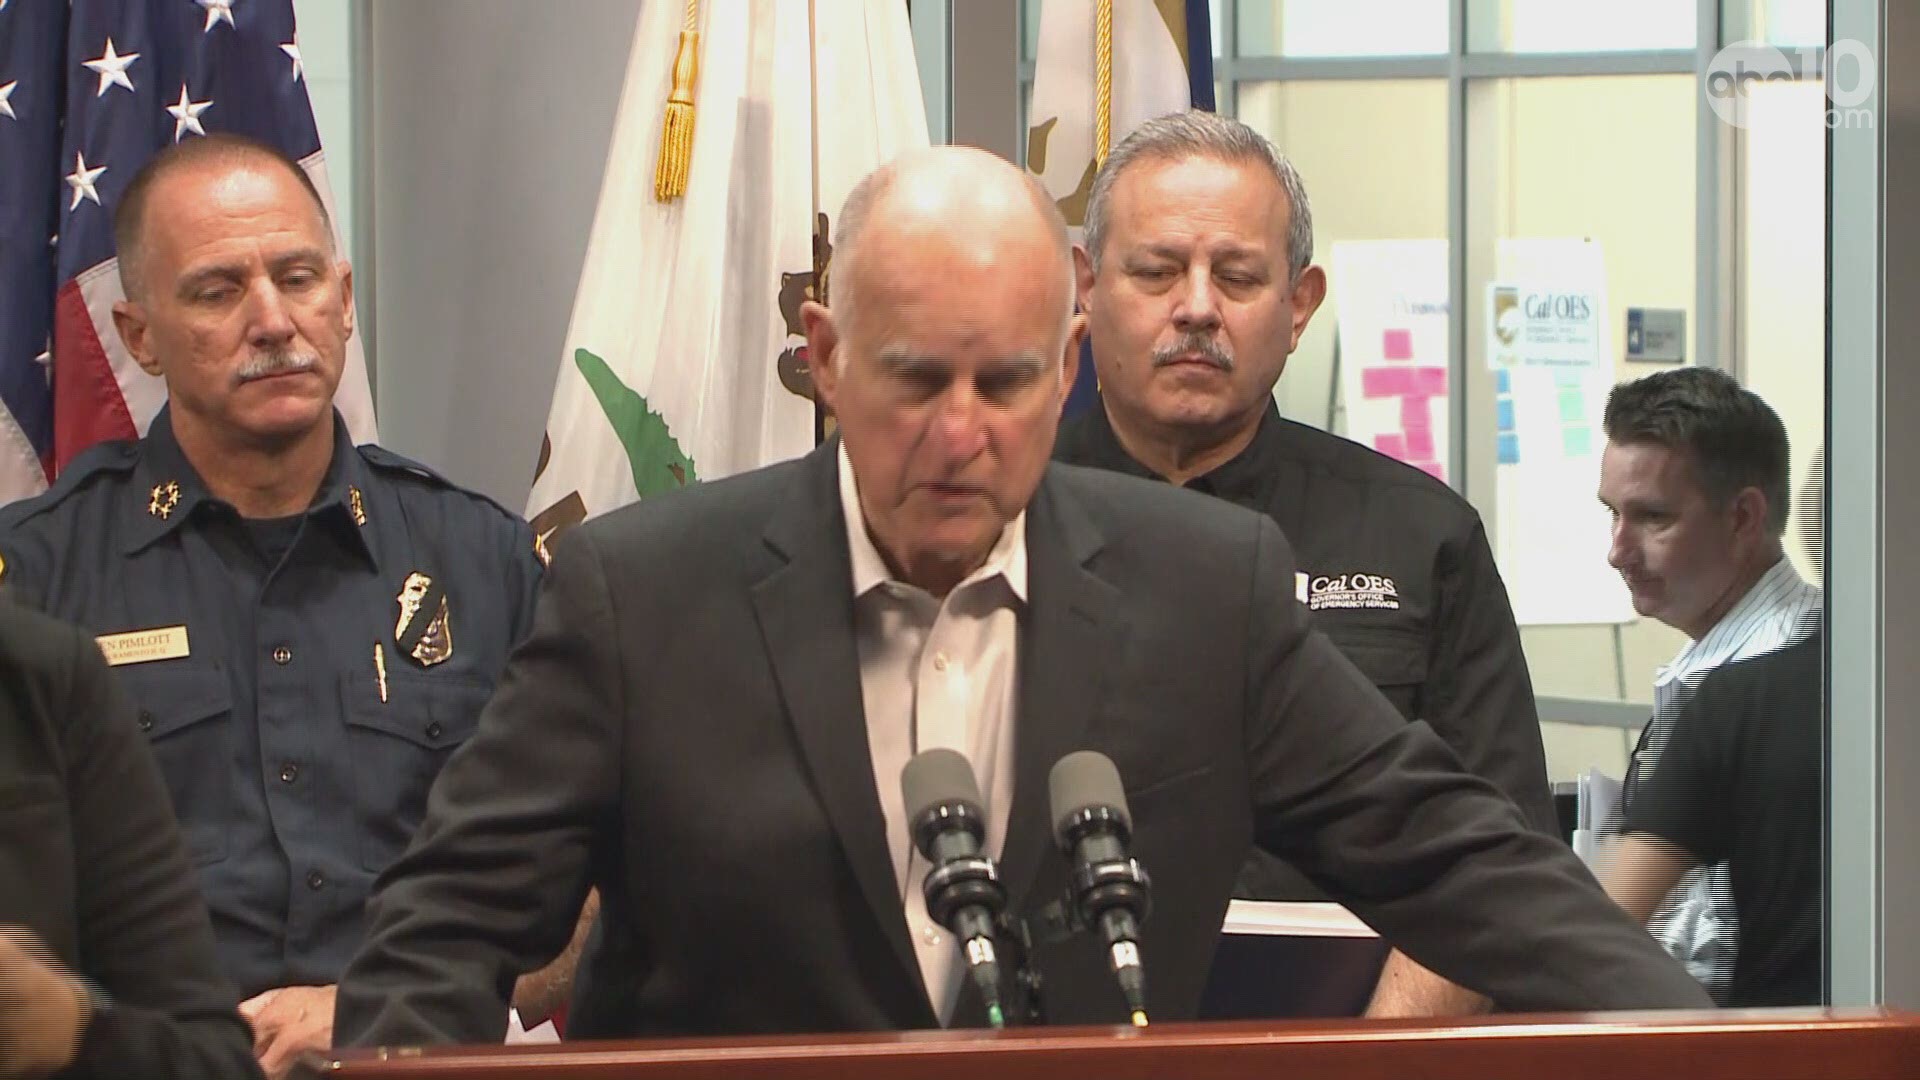 "I want to personally thank all of the firefighters who are on the line," said Governor Brown during his press conference on Wednesday. (Aug. 1, 2018)